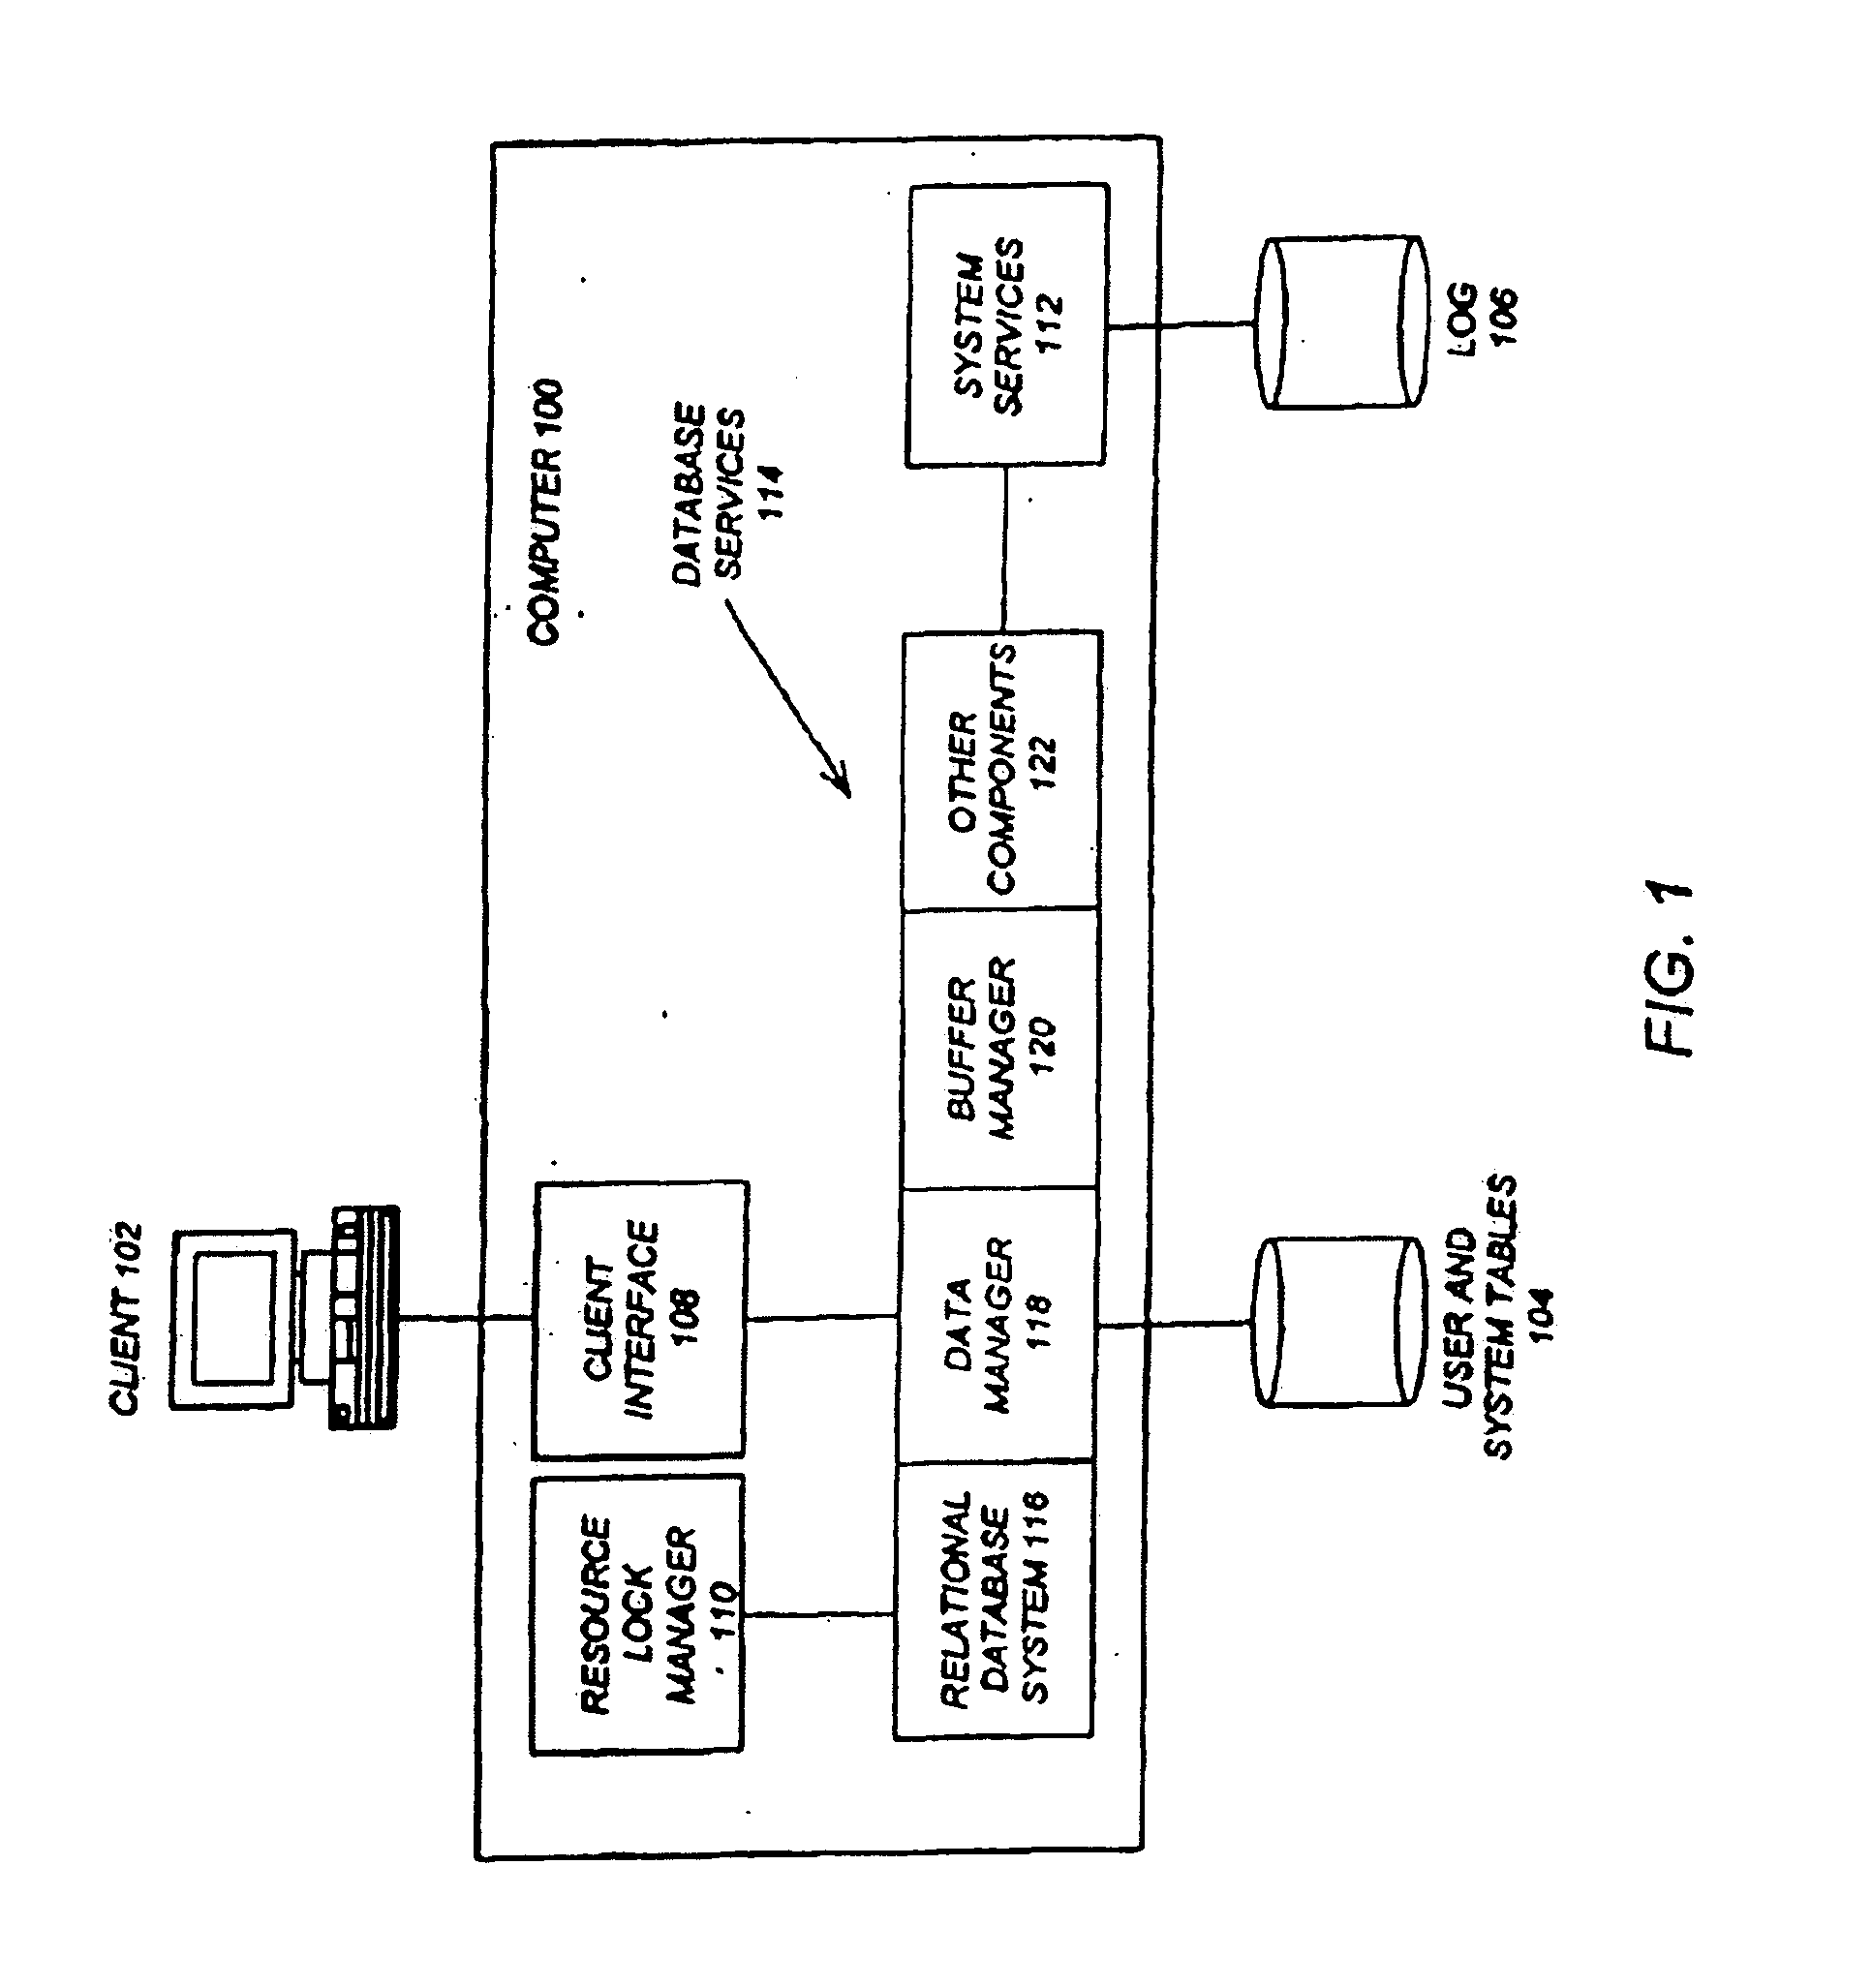 Method and system to estimate the number of distinct value combinations for a set of attributes in a database system